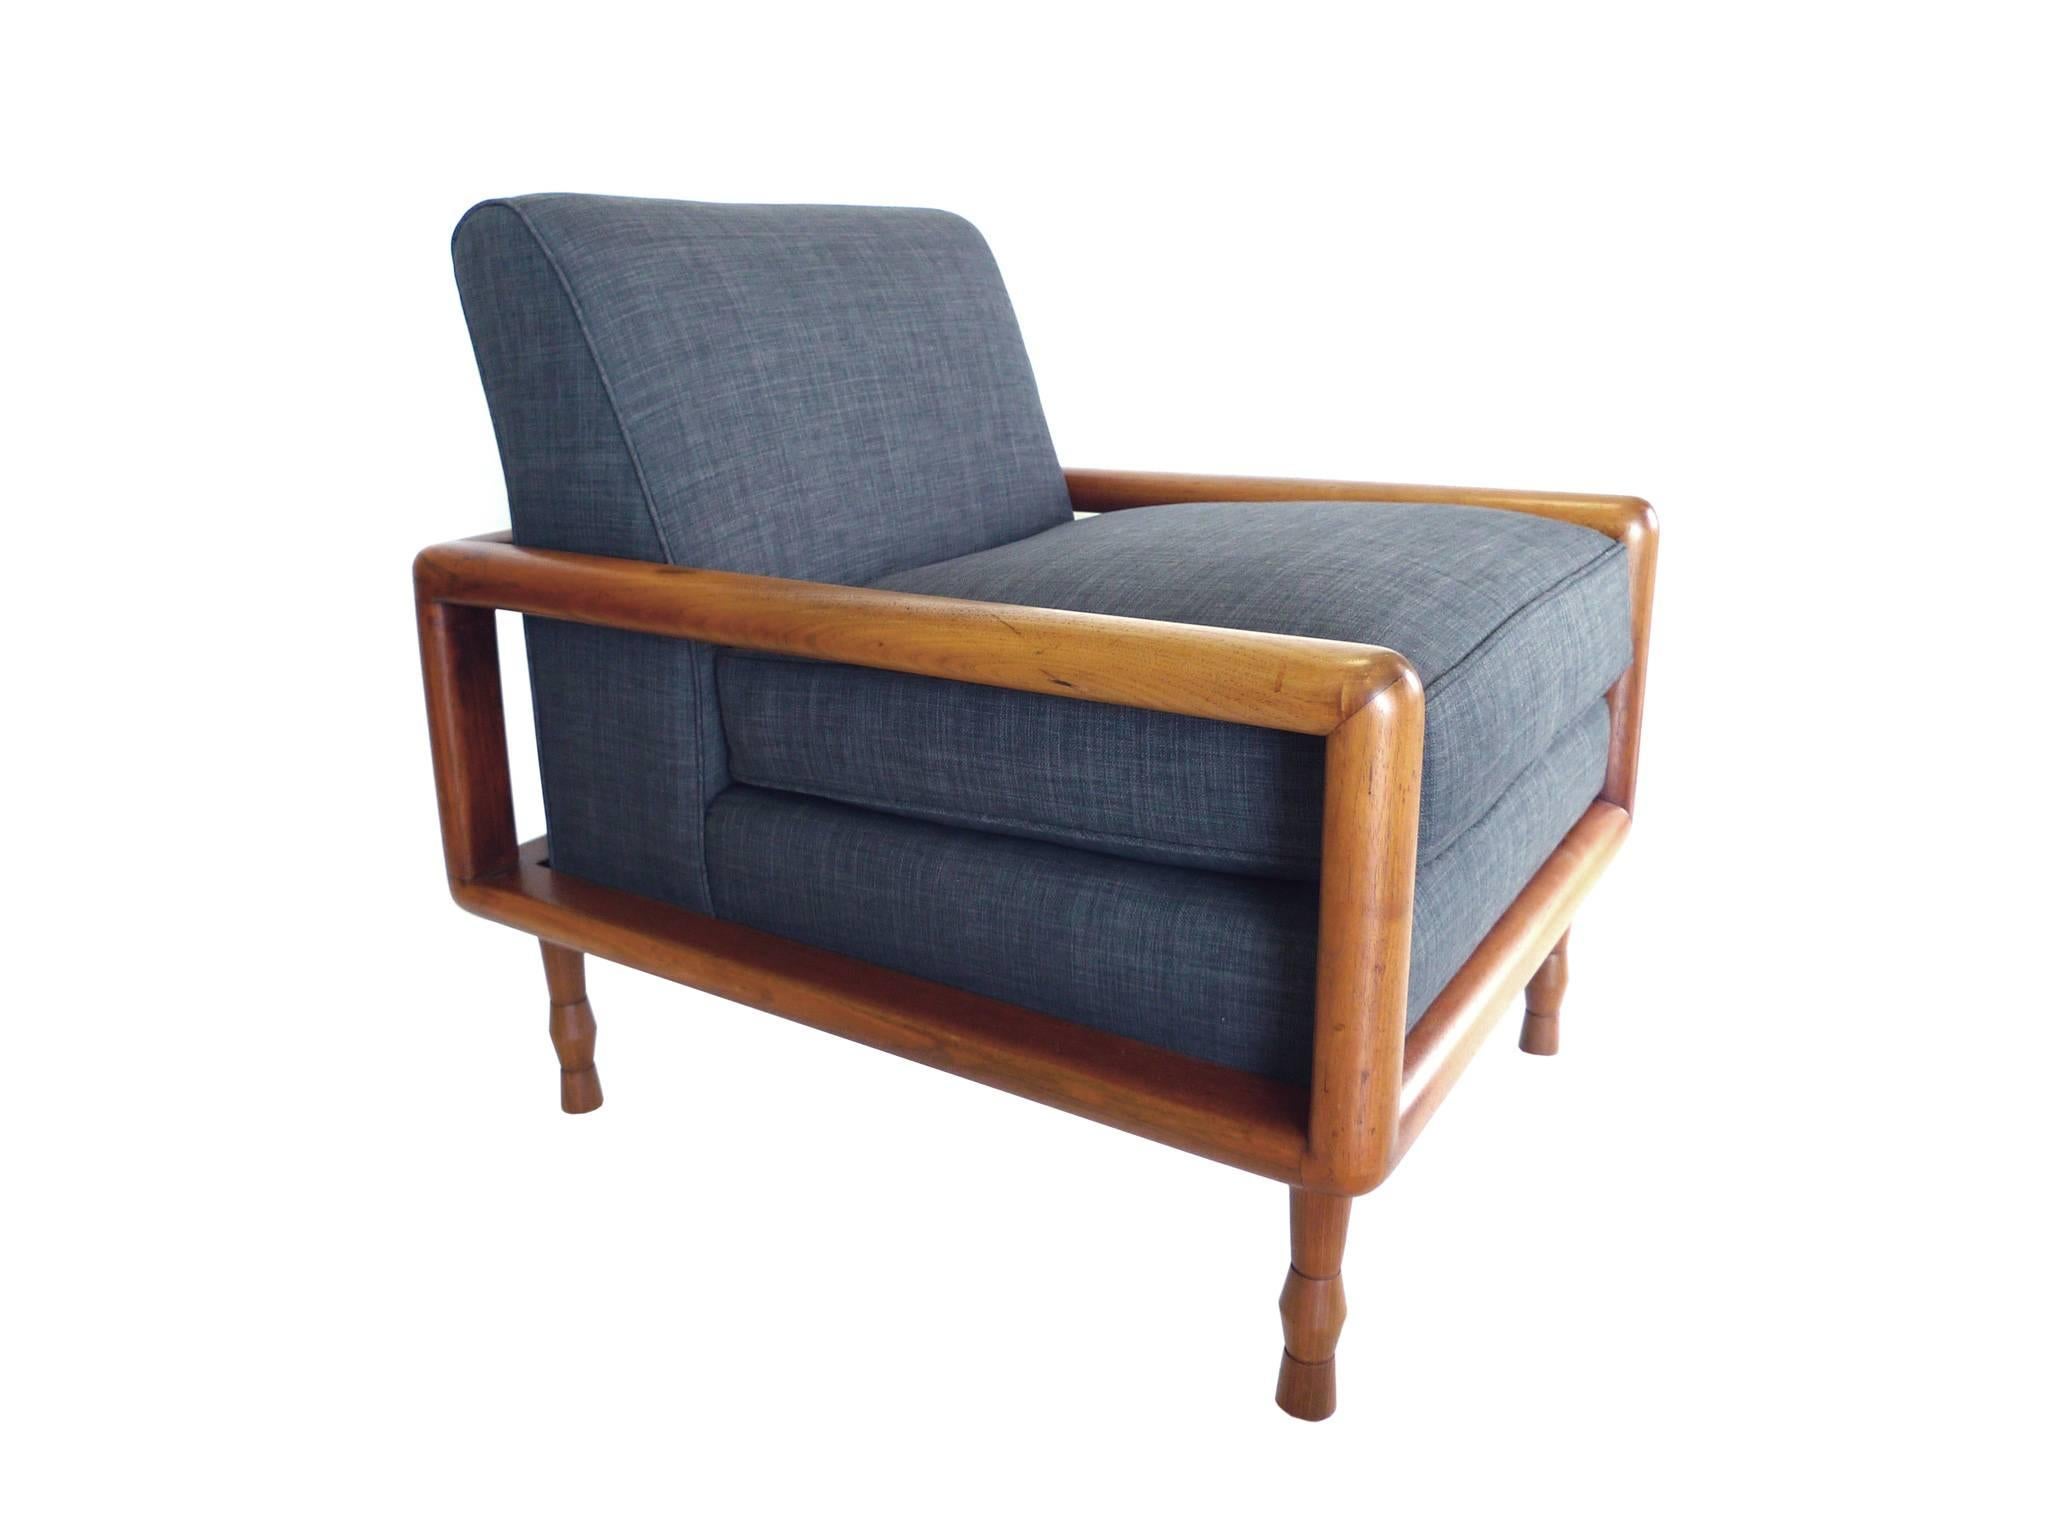 Mid-20th Century Mid-Century Walnut Sofa and Armchair Set in the Style of T.H. Robsjohn-Gibbings